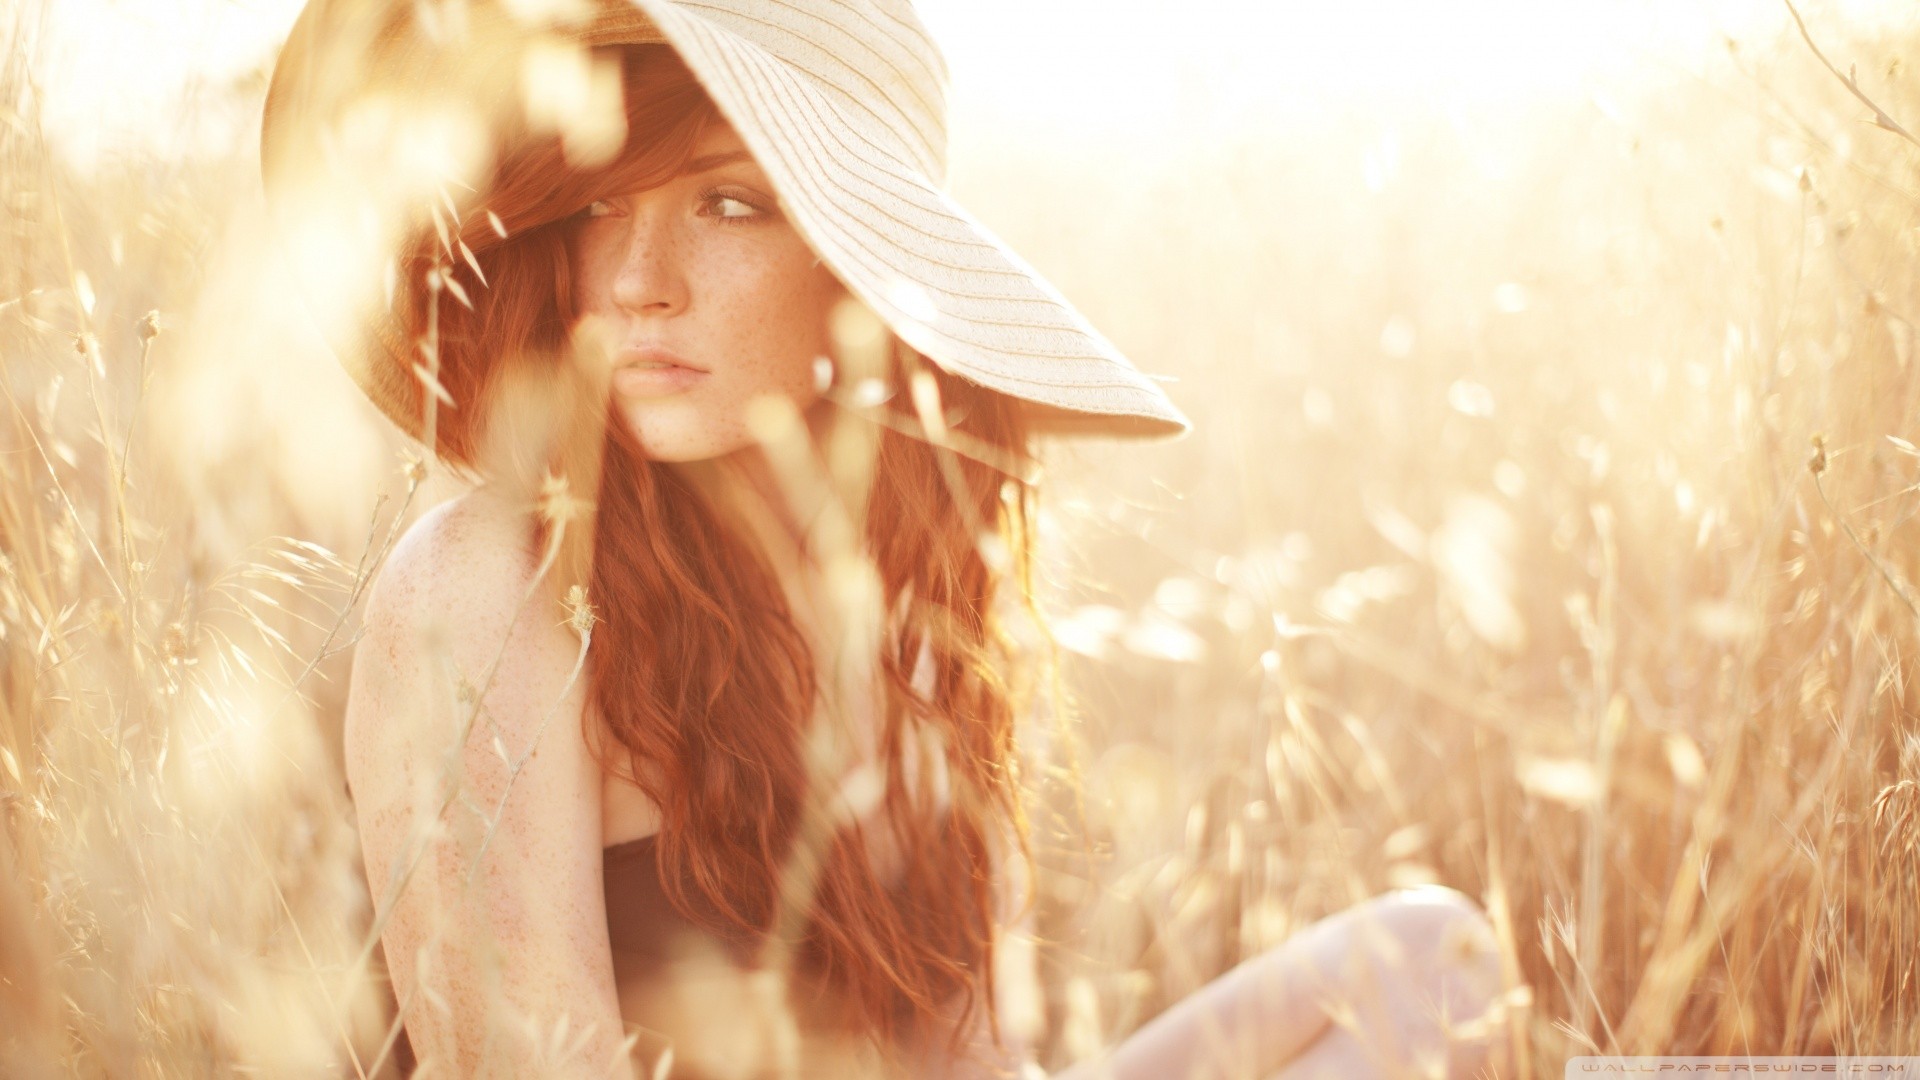 People 1920x1080 women redhead freckles Danielle Victoria Perry hat plants sunlight long hair women with hats model women outdoors looking away watermarked